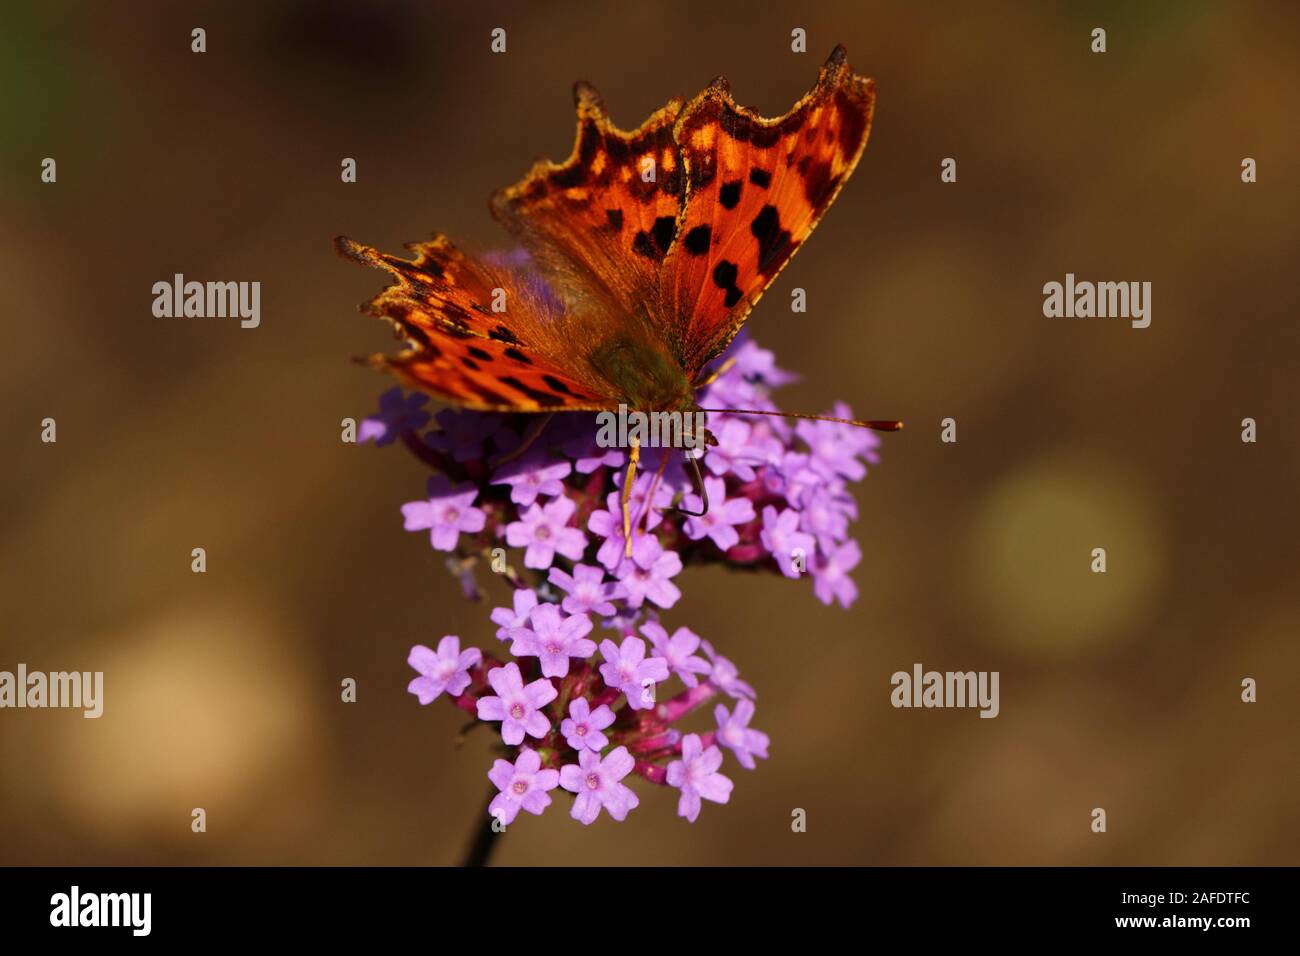 Comma butterfly nectaring on Verbena Stock Photo